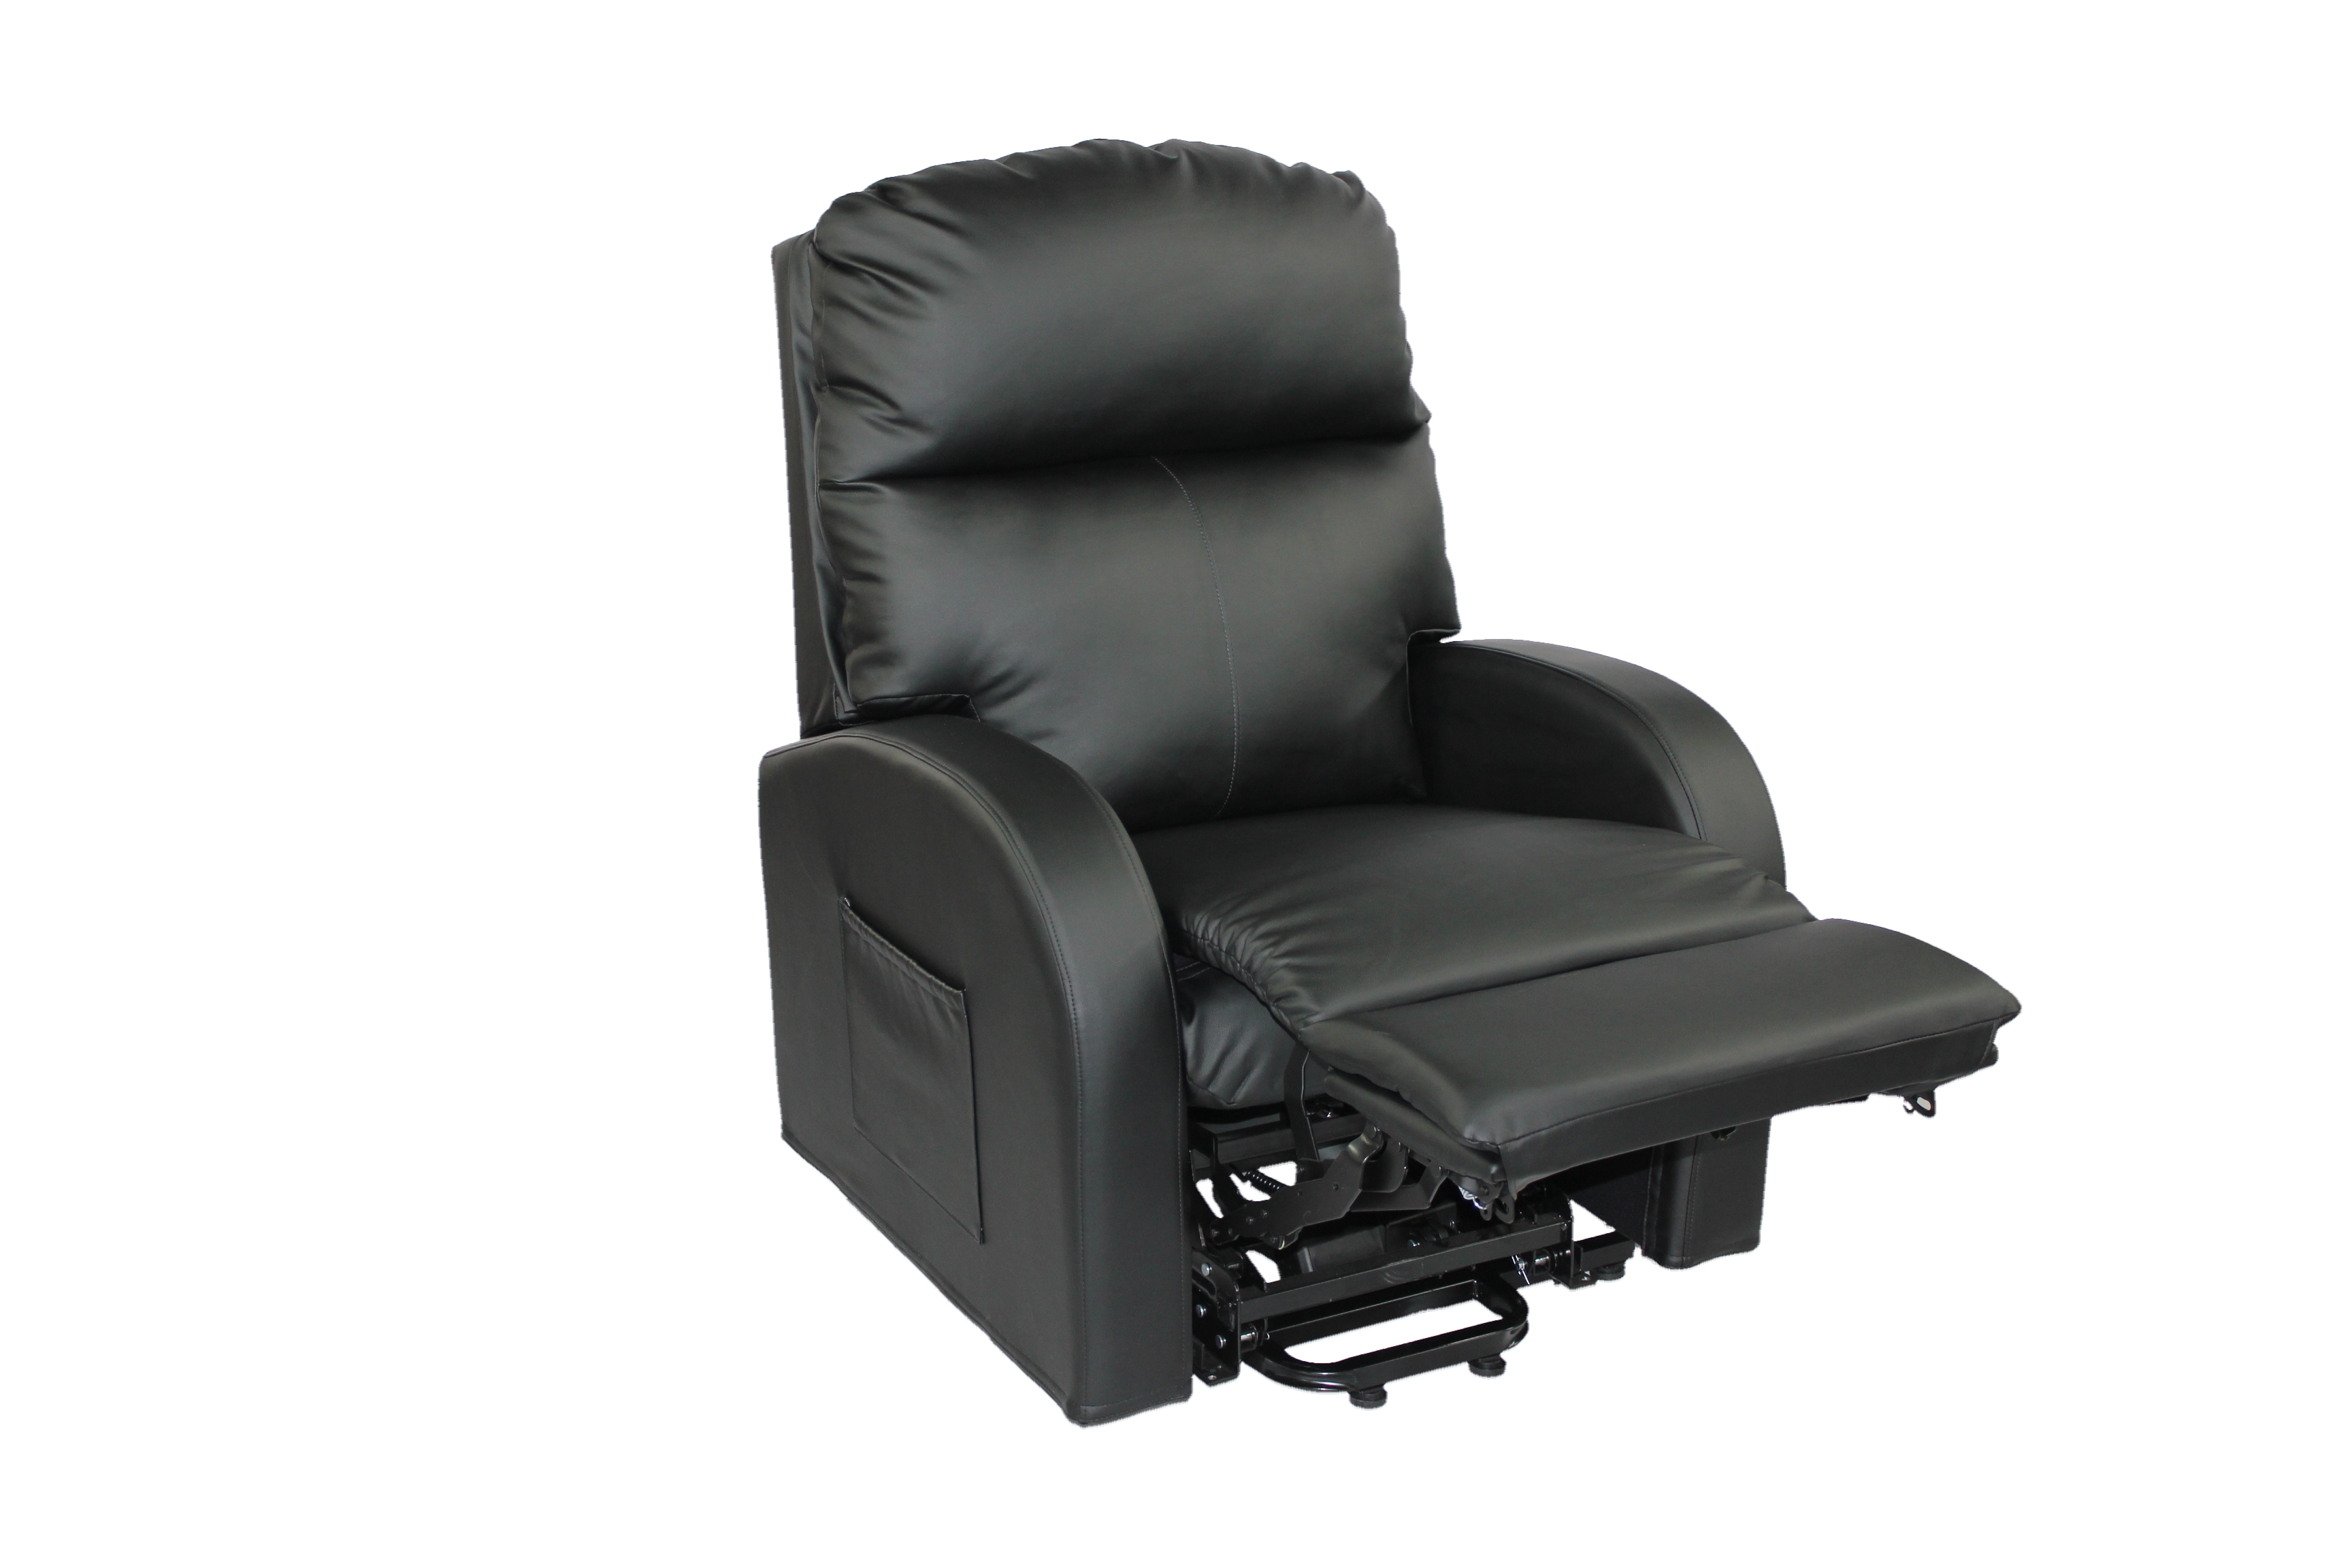 BME 002 Electric Assist Reclining Power Lift Chair with Massage Function for Elderly